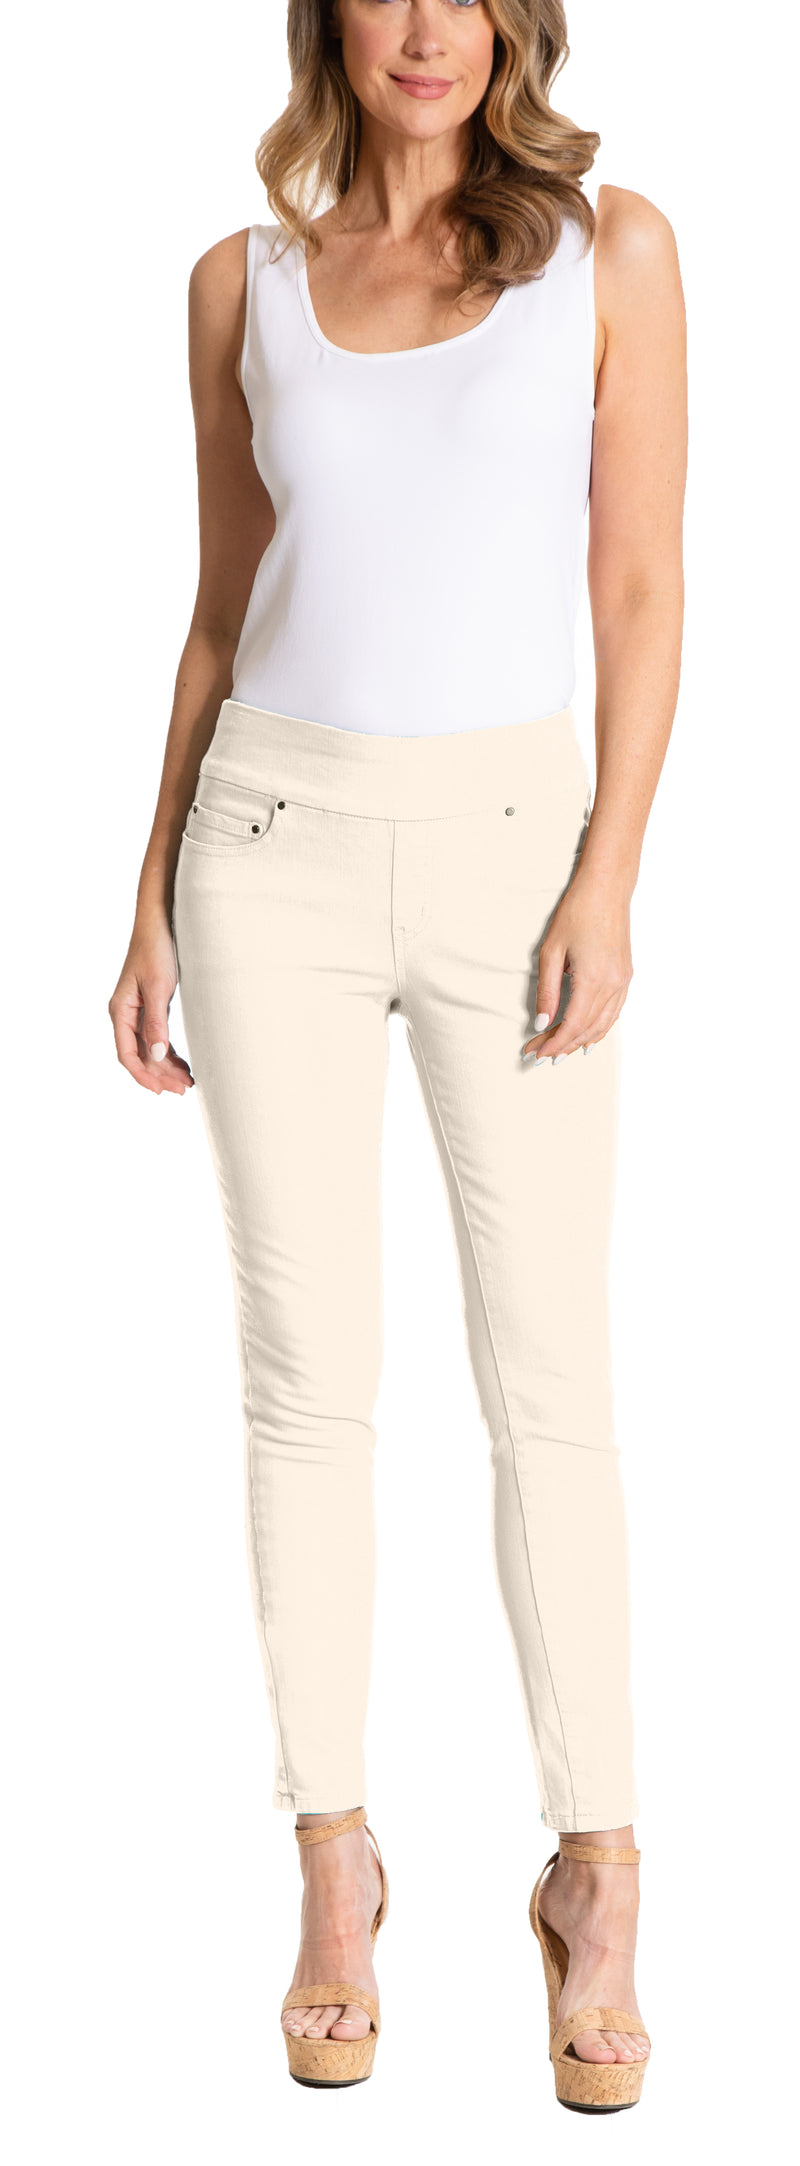 4 WAY STRETCH PULL ON SKINNY ANKLE JEAN - Pearl